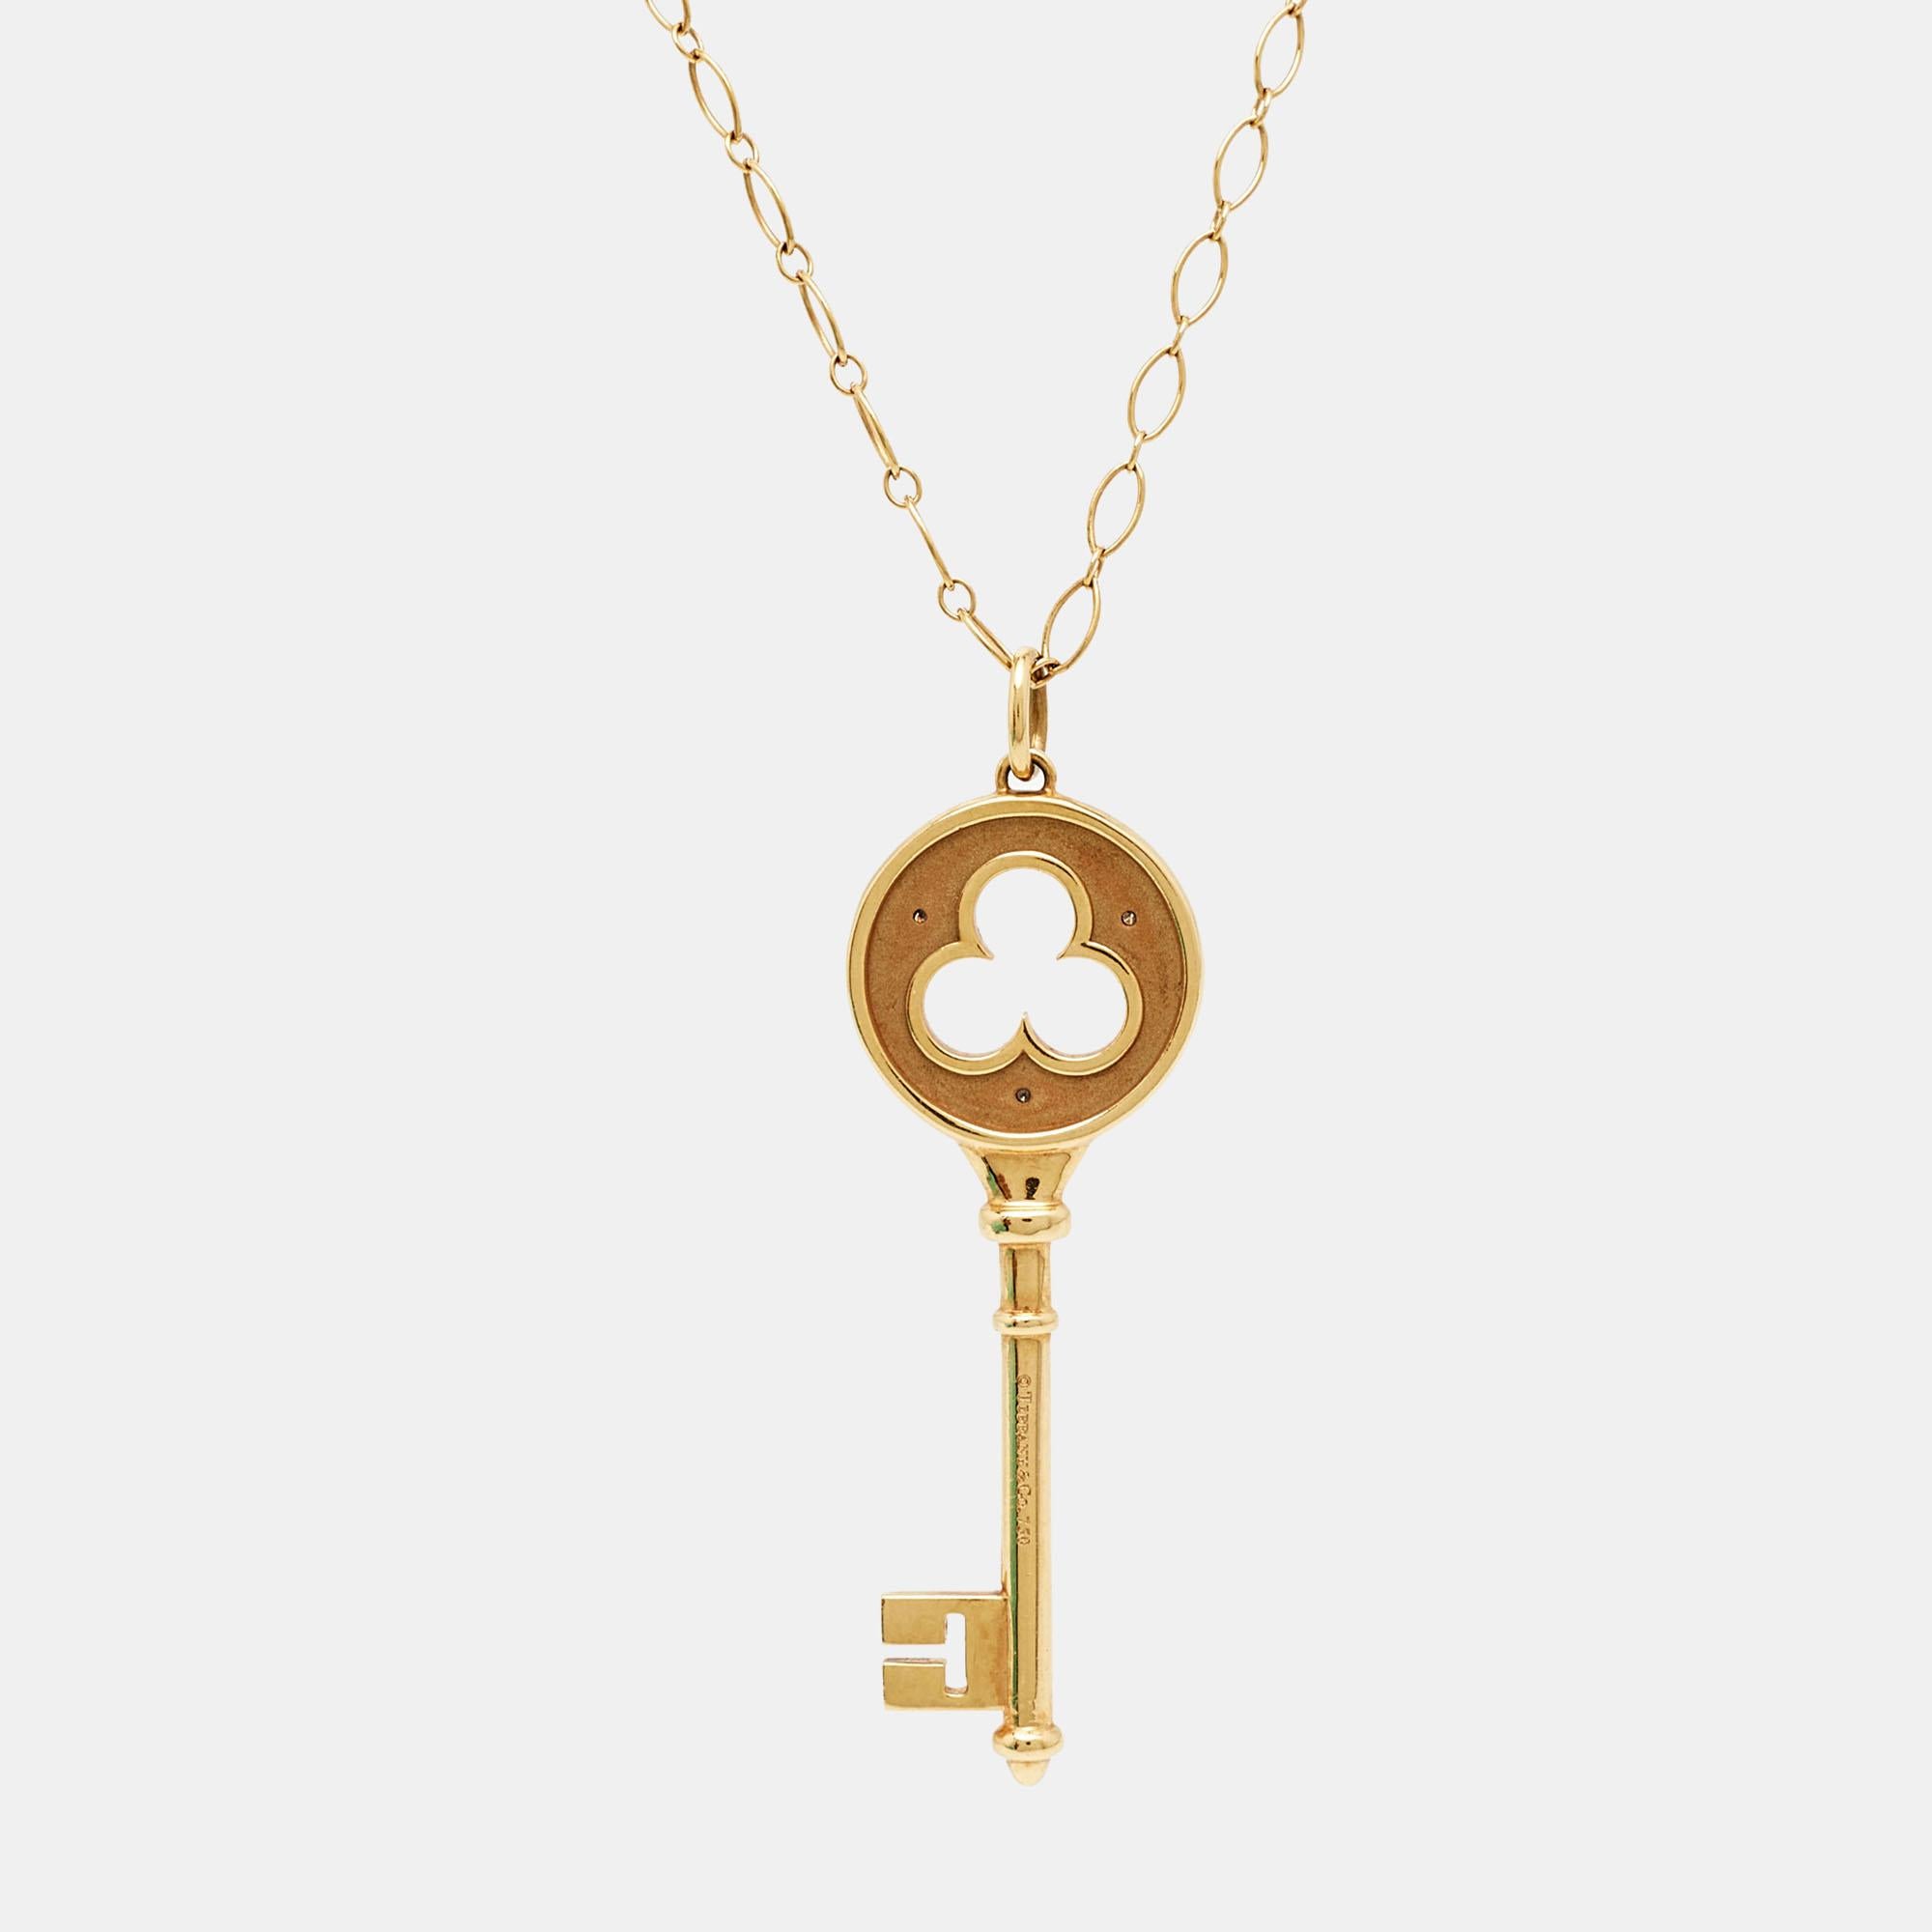 Tiffany & Co. carry the reputation of excellent craftsmanship and exquisite creativity when it comes to jewelry, and this gorgeous Key necklace in 18k gold is a sweet proof. The pendant is shaped like a key and immaculately adorned with